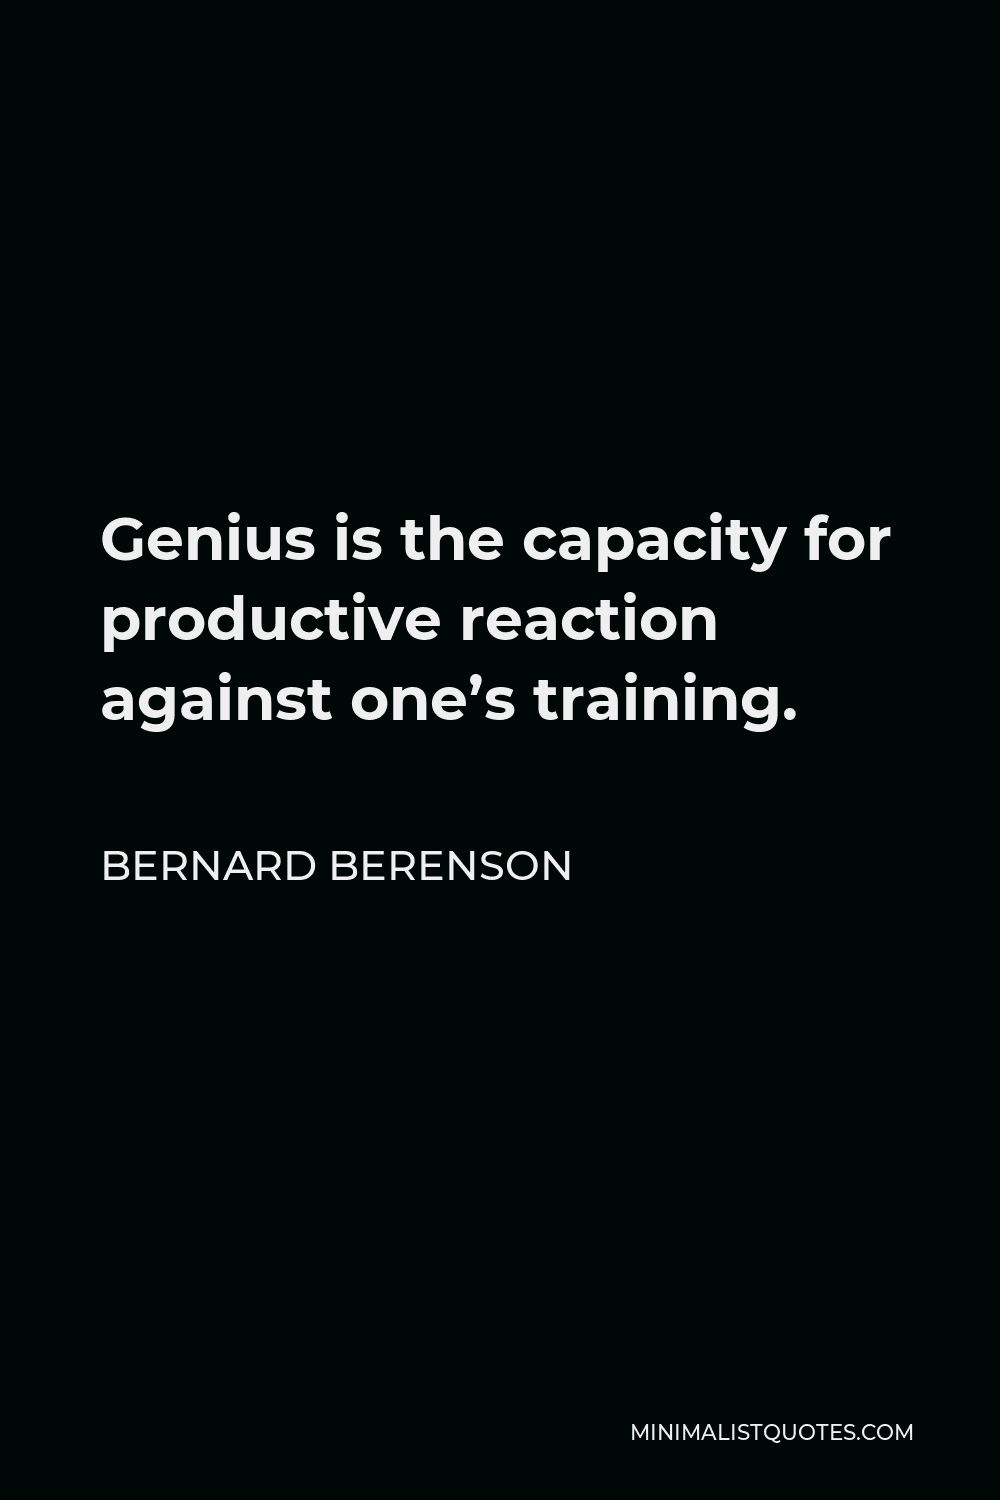 Bernard Berenson Quote - Genius is the capacity for productive reaction against one’s training.